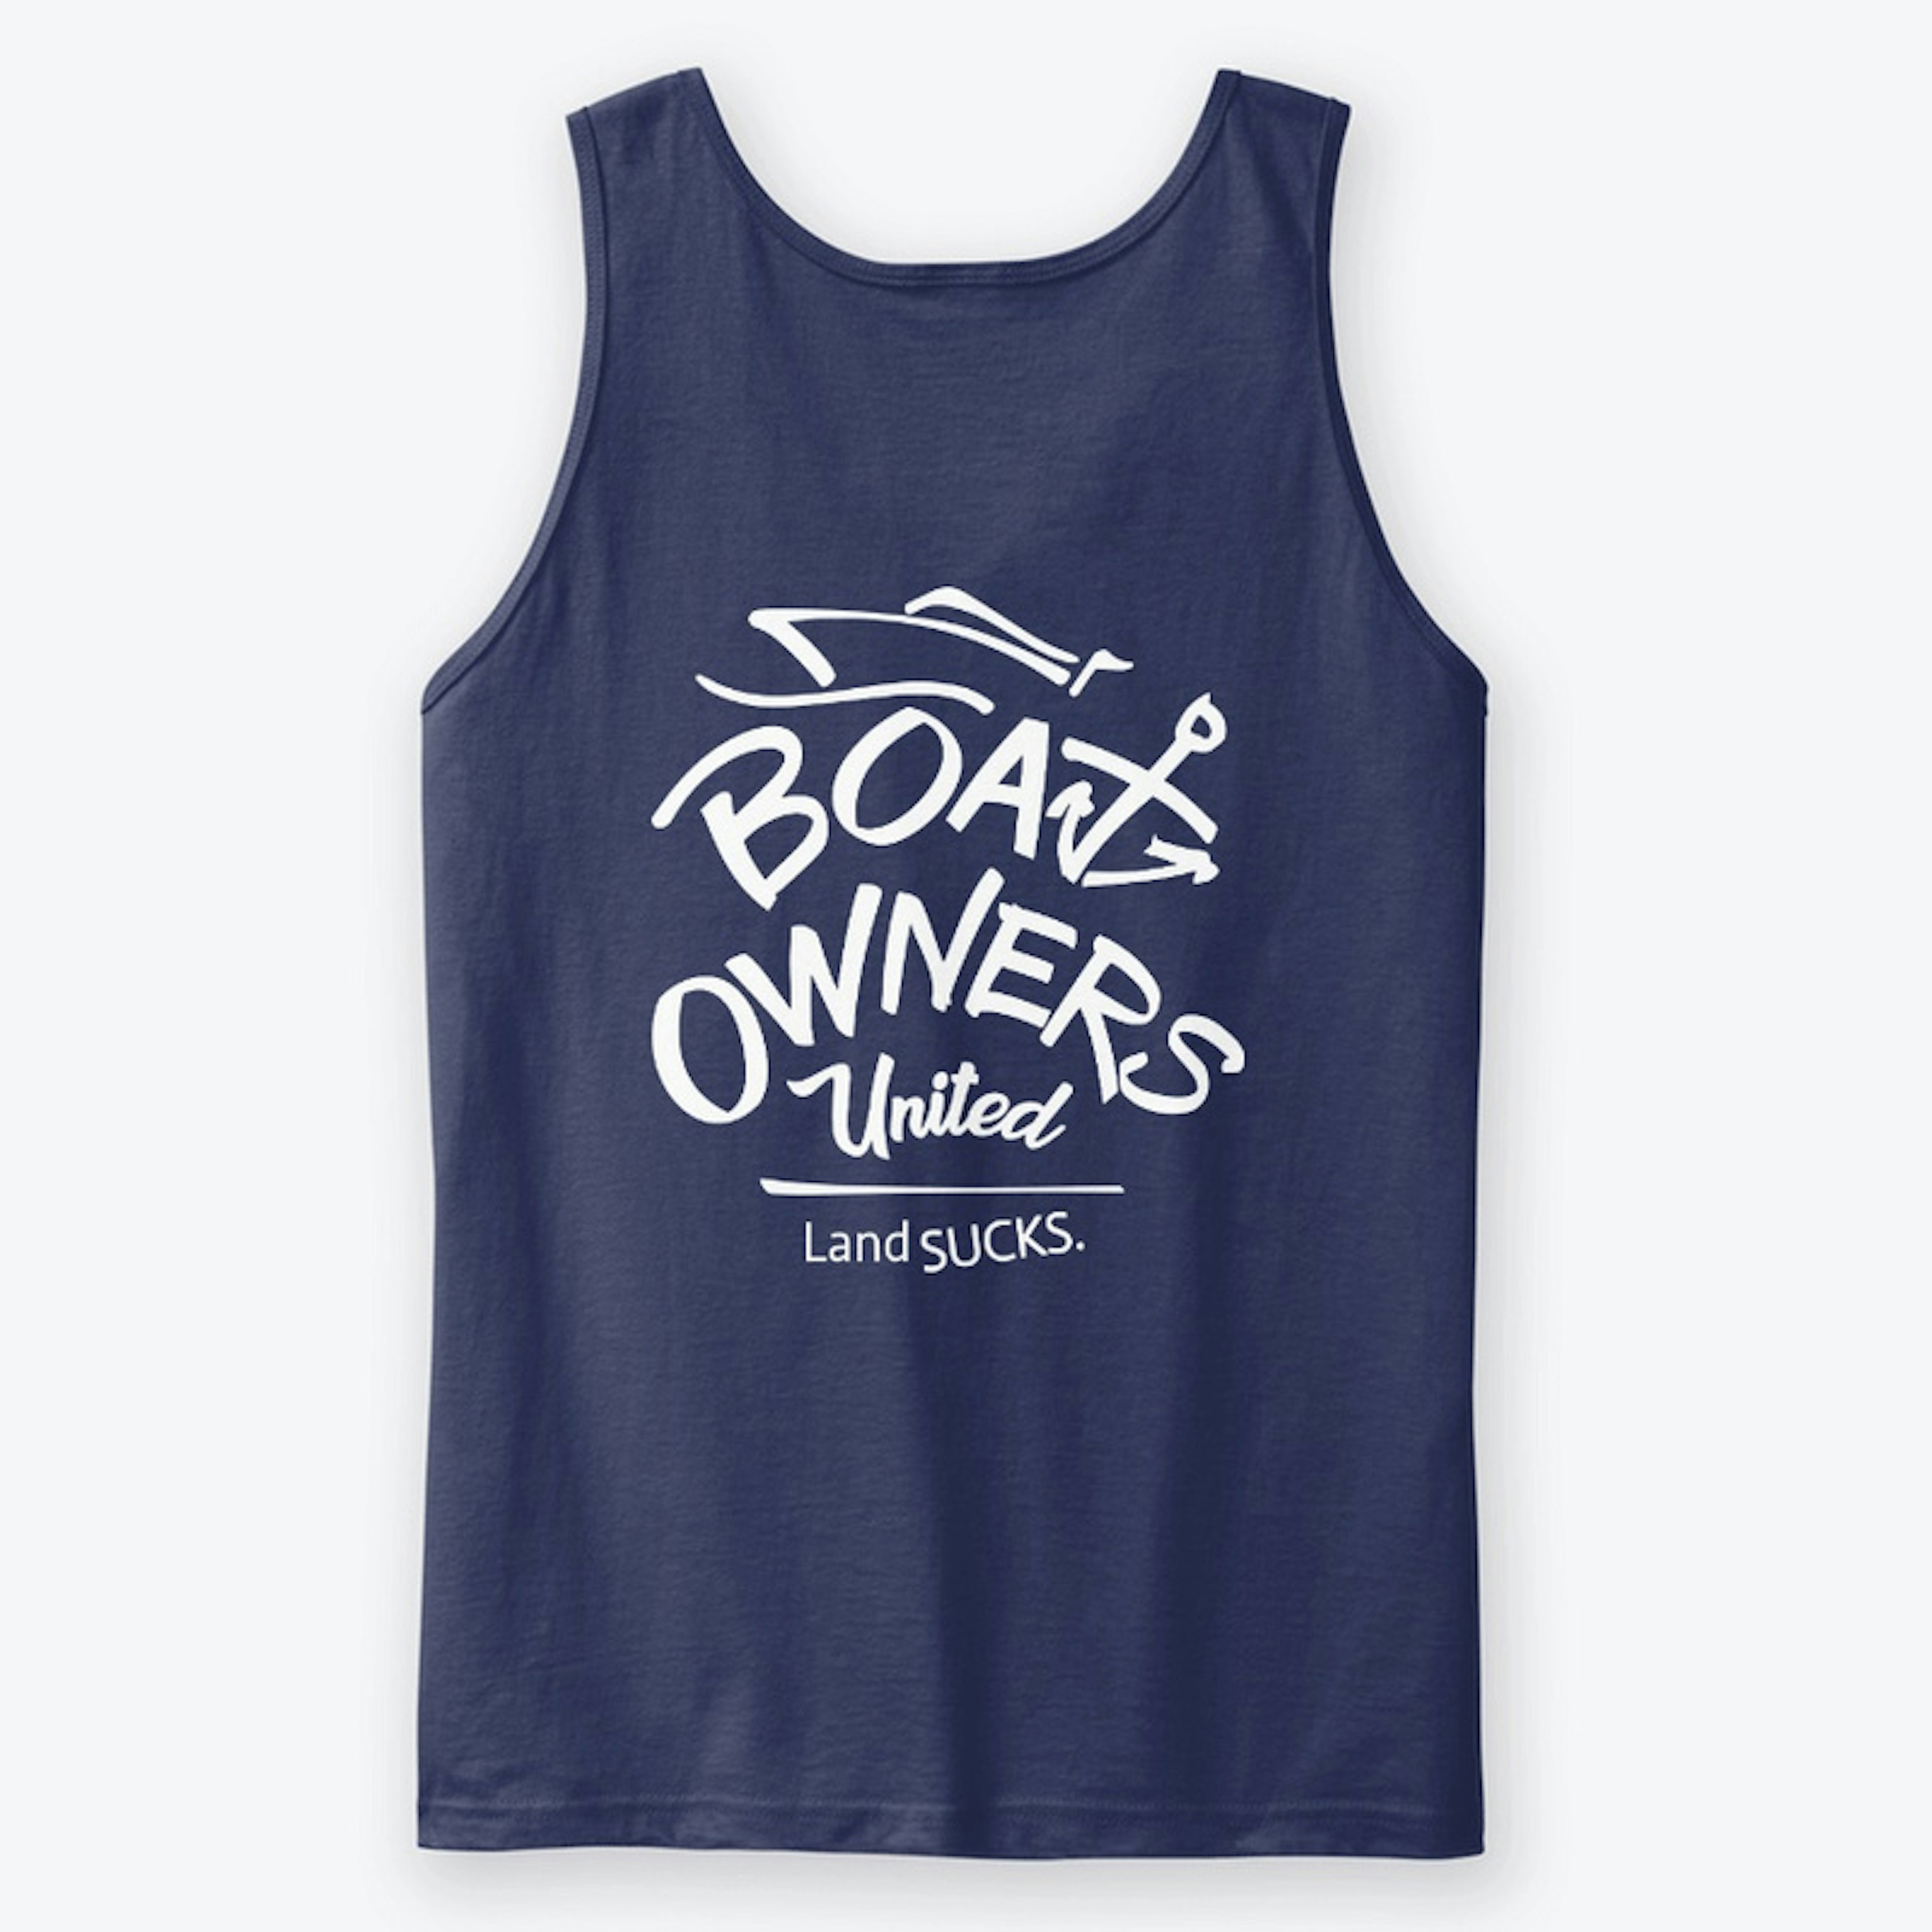 Boat Owners United - Official Men's Tank